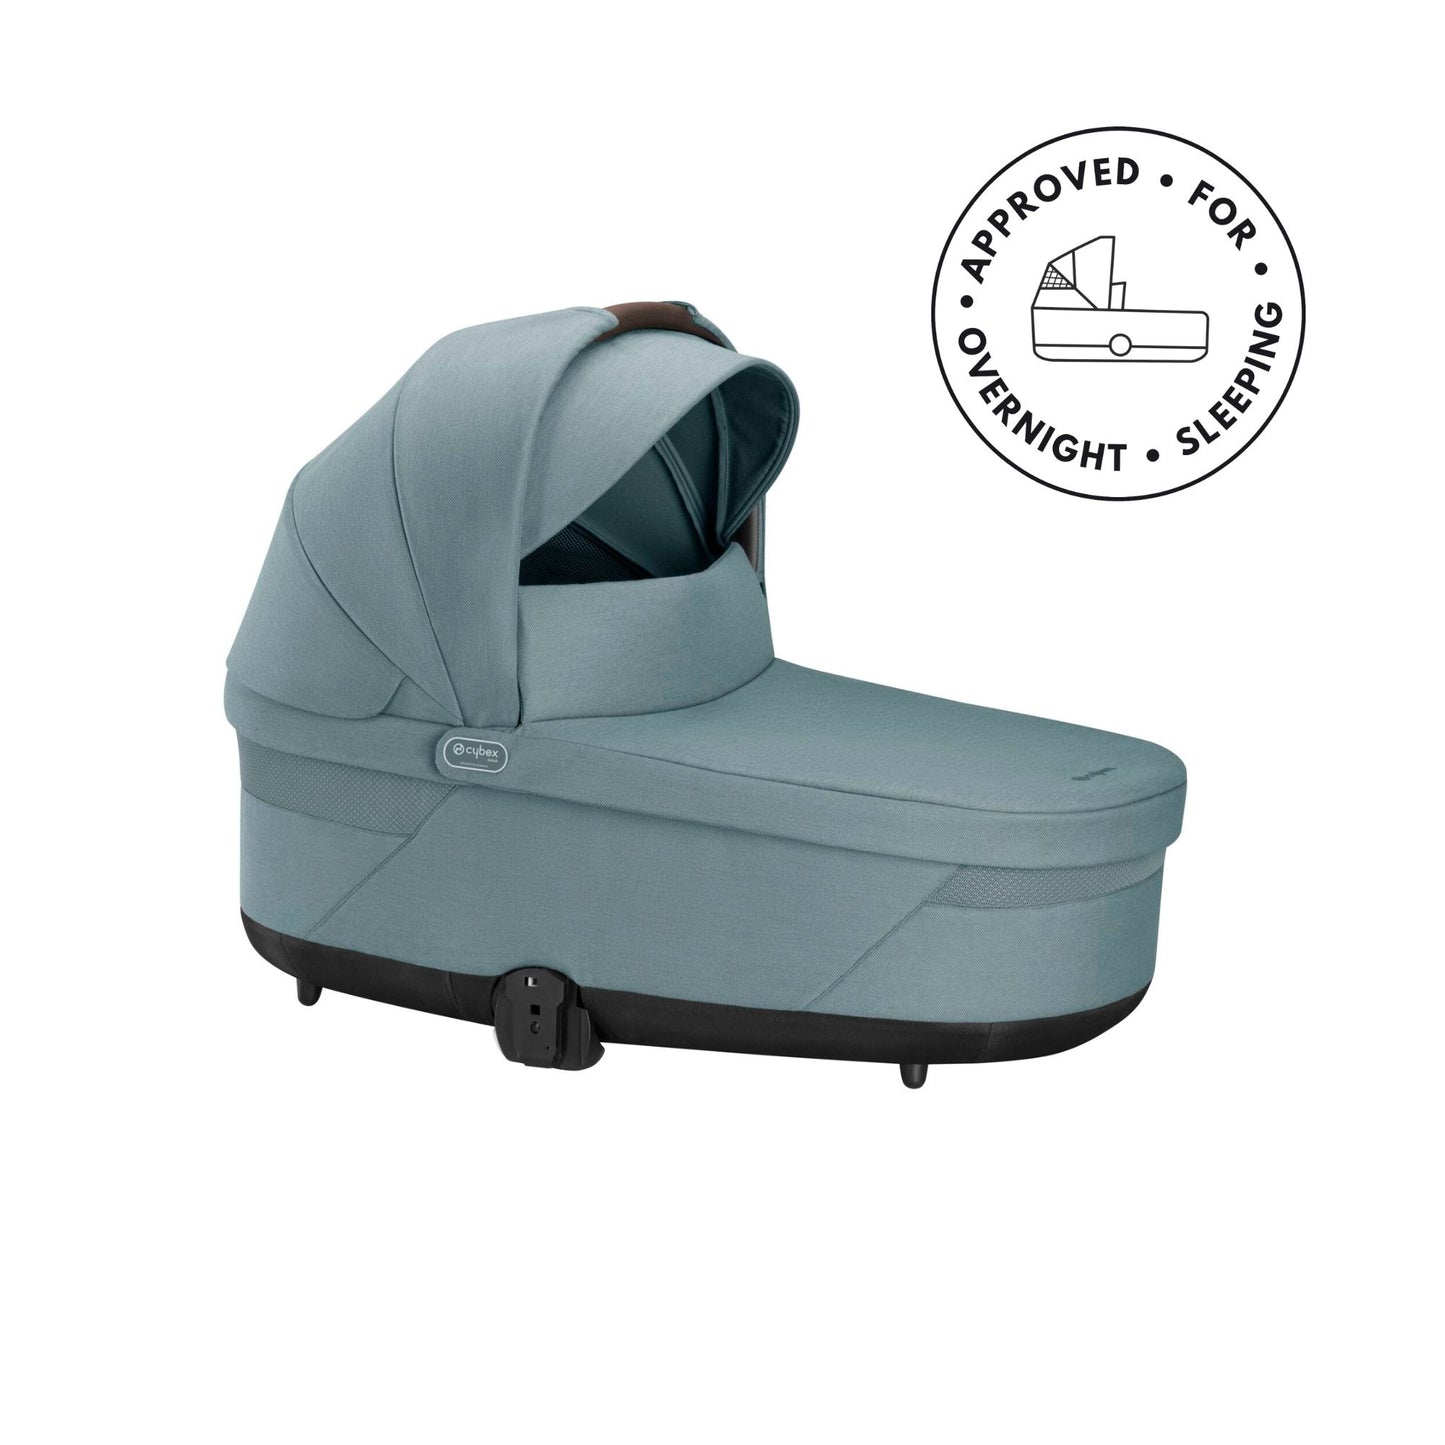 Cybex COT S LUX Carrycot Sky Blue